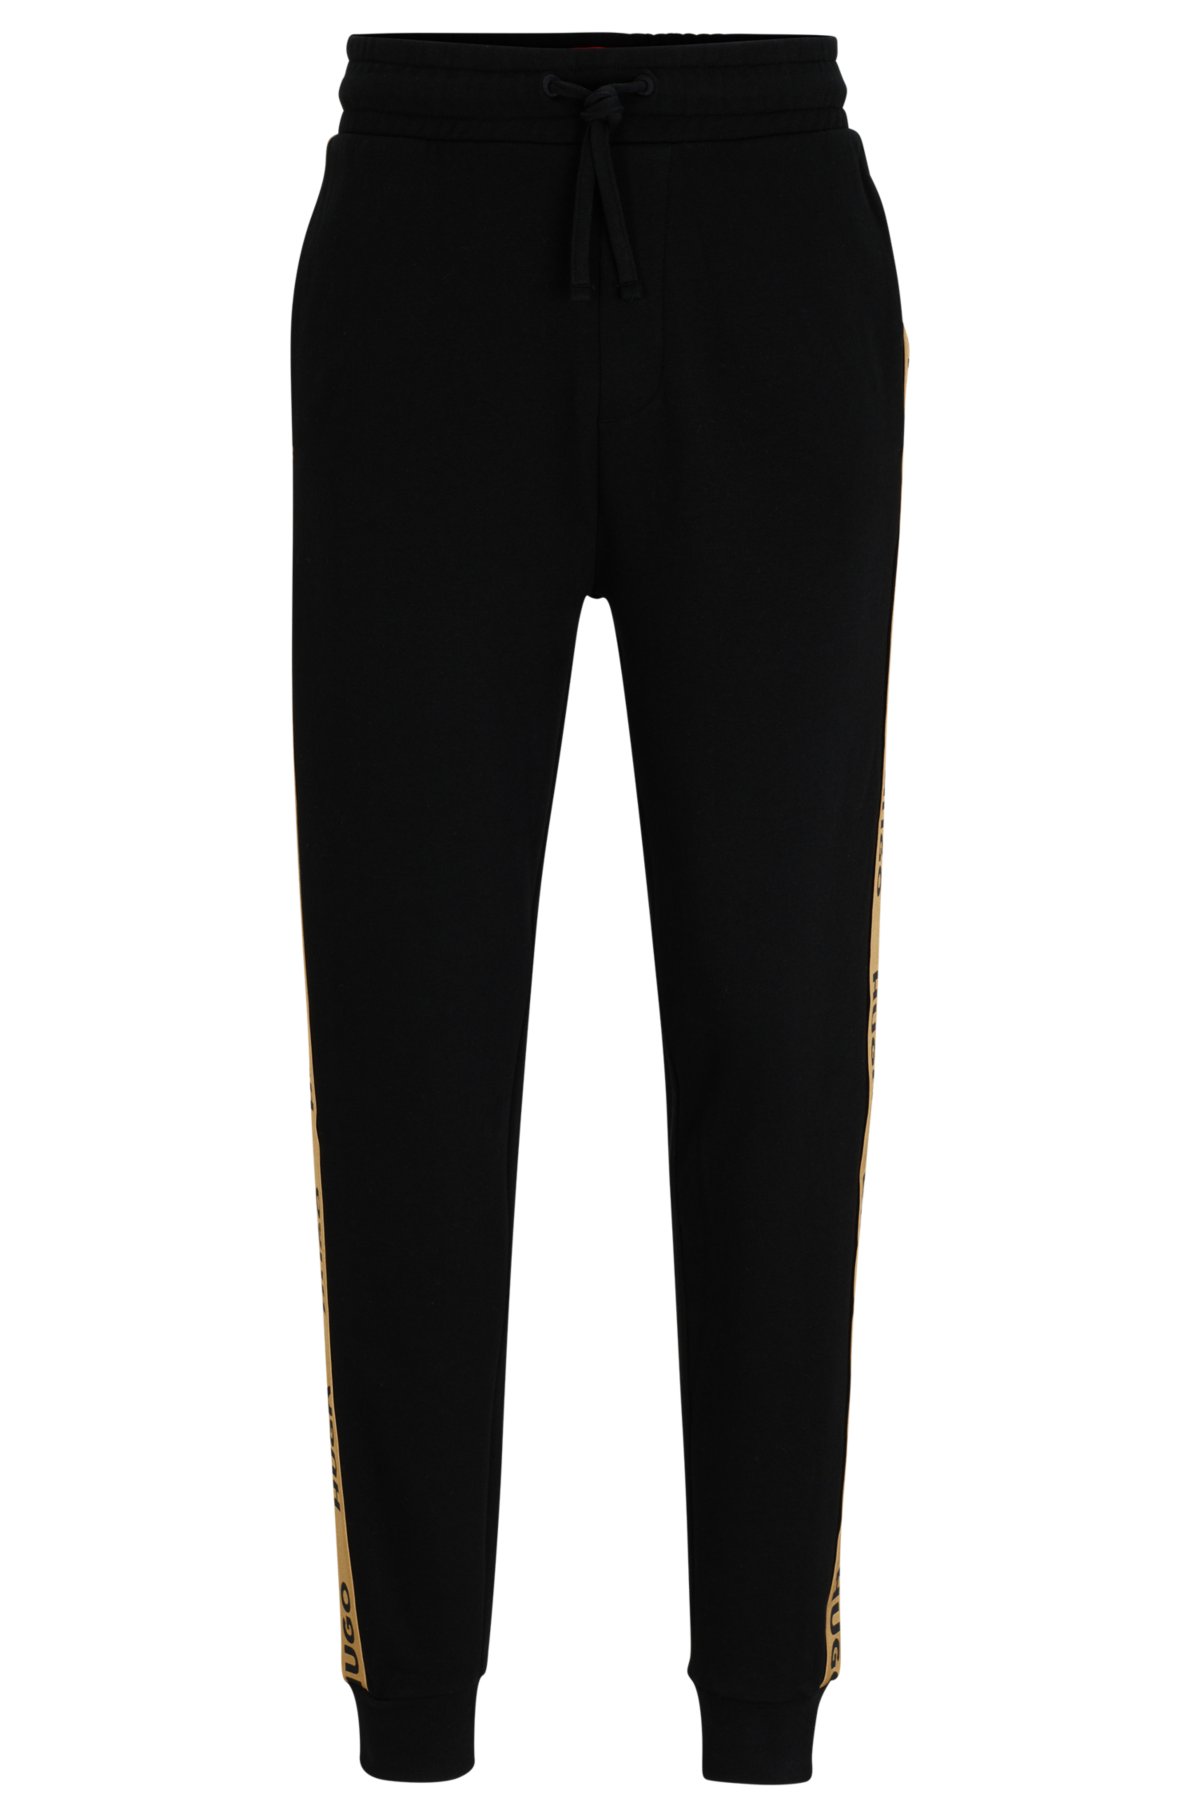 HUGO - Cuffed tracksuit logo bottoms with in tape